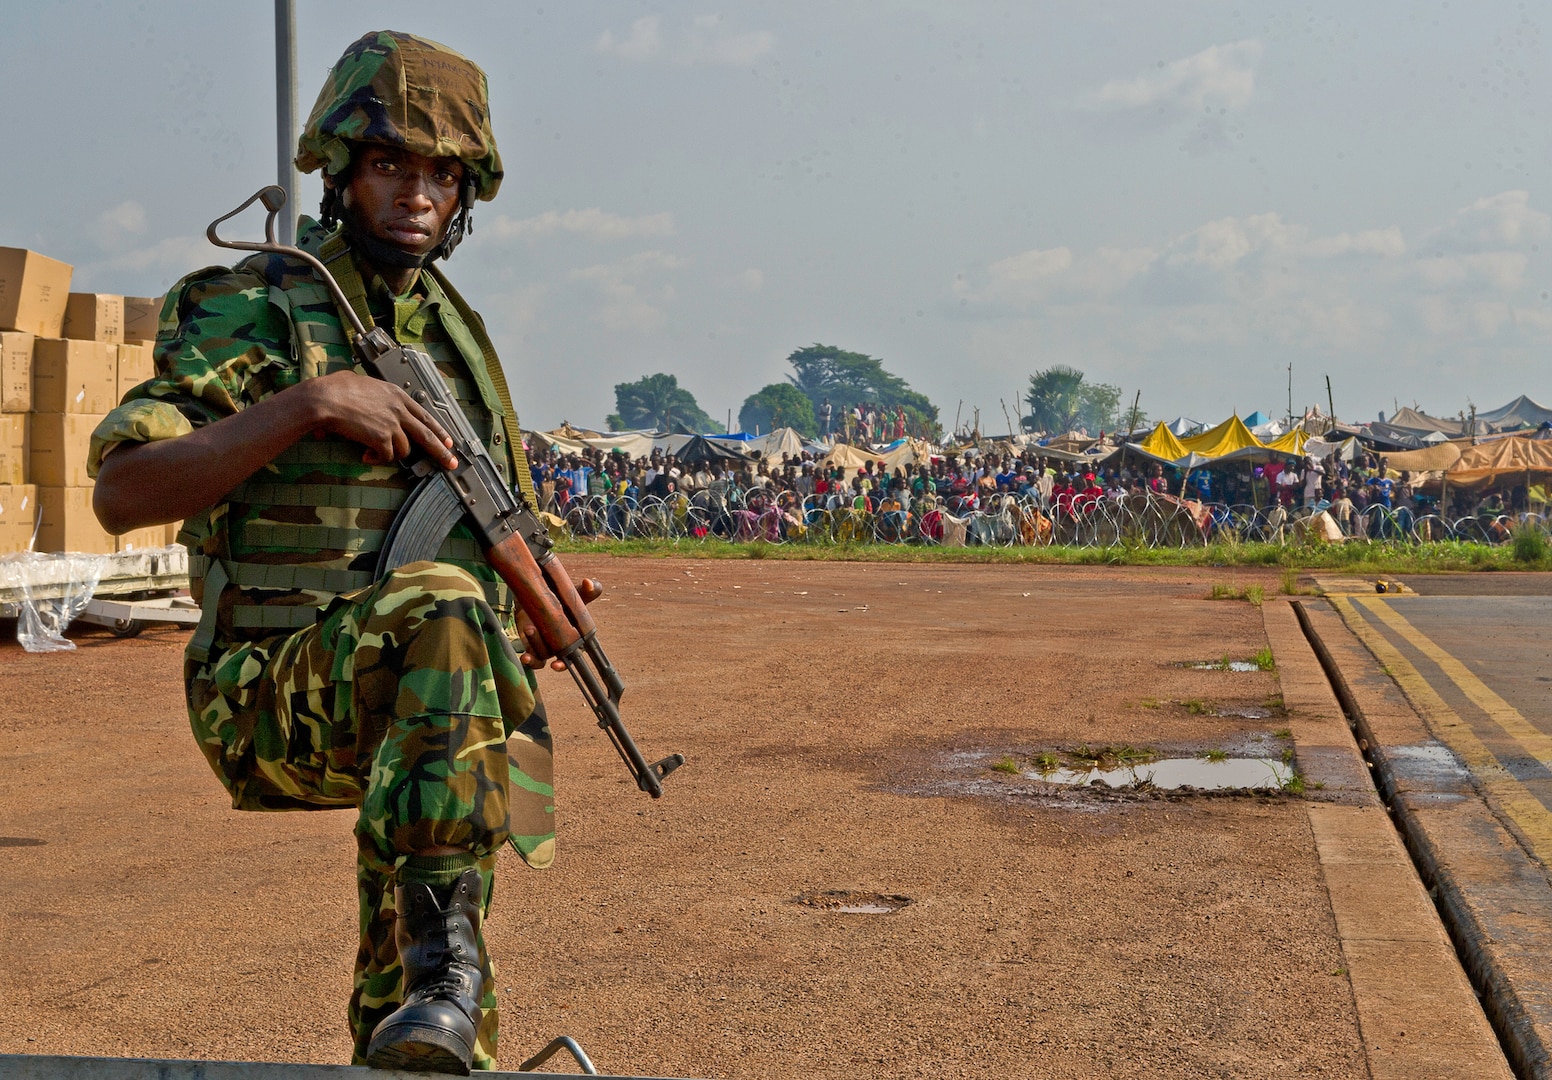 A Burundi soldier posts security at the Bangui Airport, Central African Republic (CAR) in late 2013. In coordination with the French military and African Union, the U.S. military provided airlift support to help enable African forces to deploy promptly to prevent further spread of sectarian violence and restore security in CAR. 